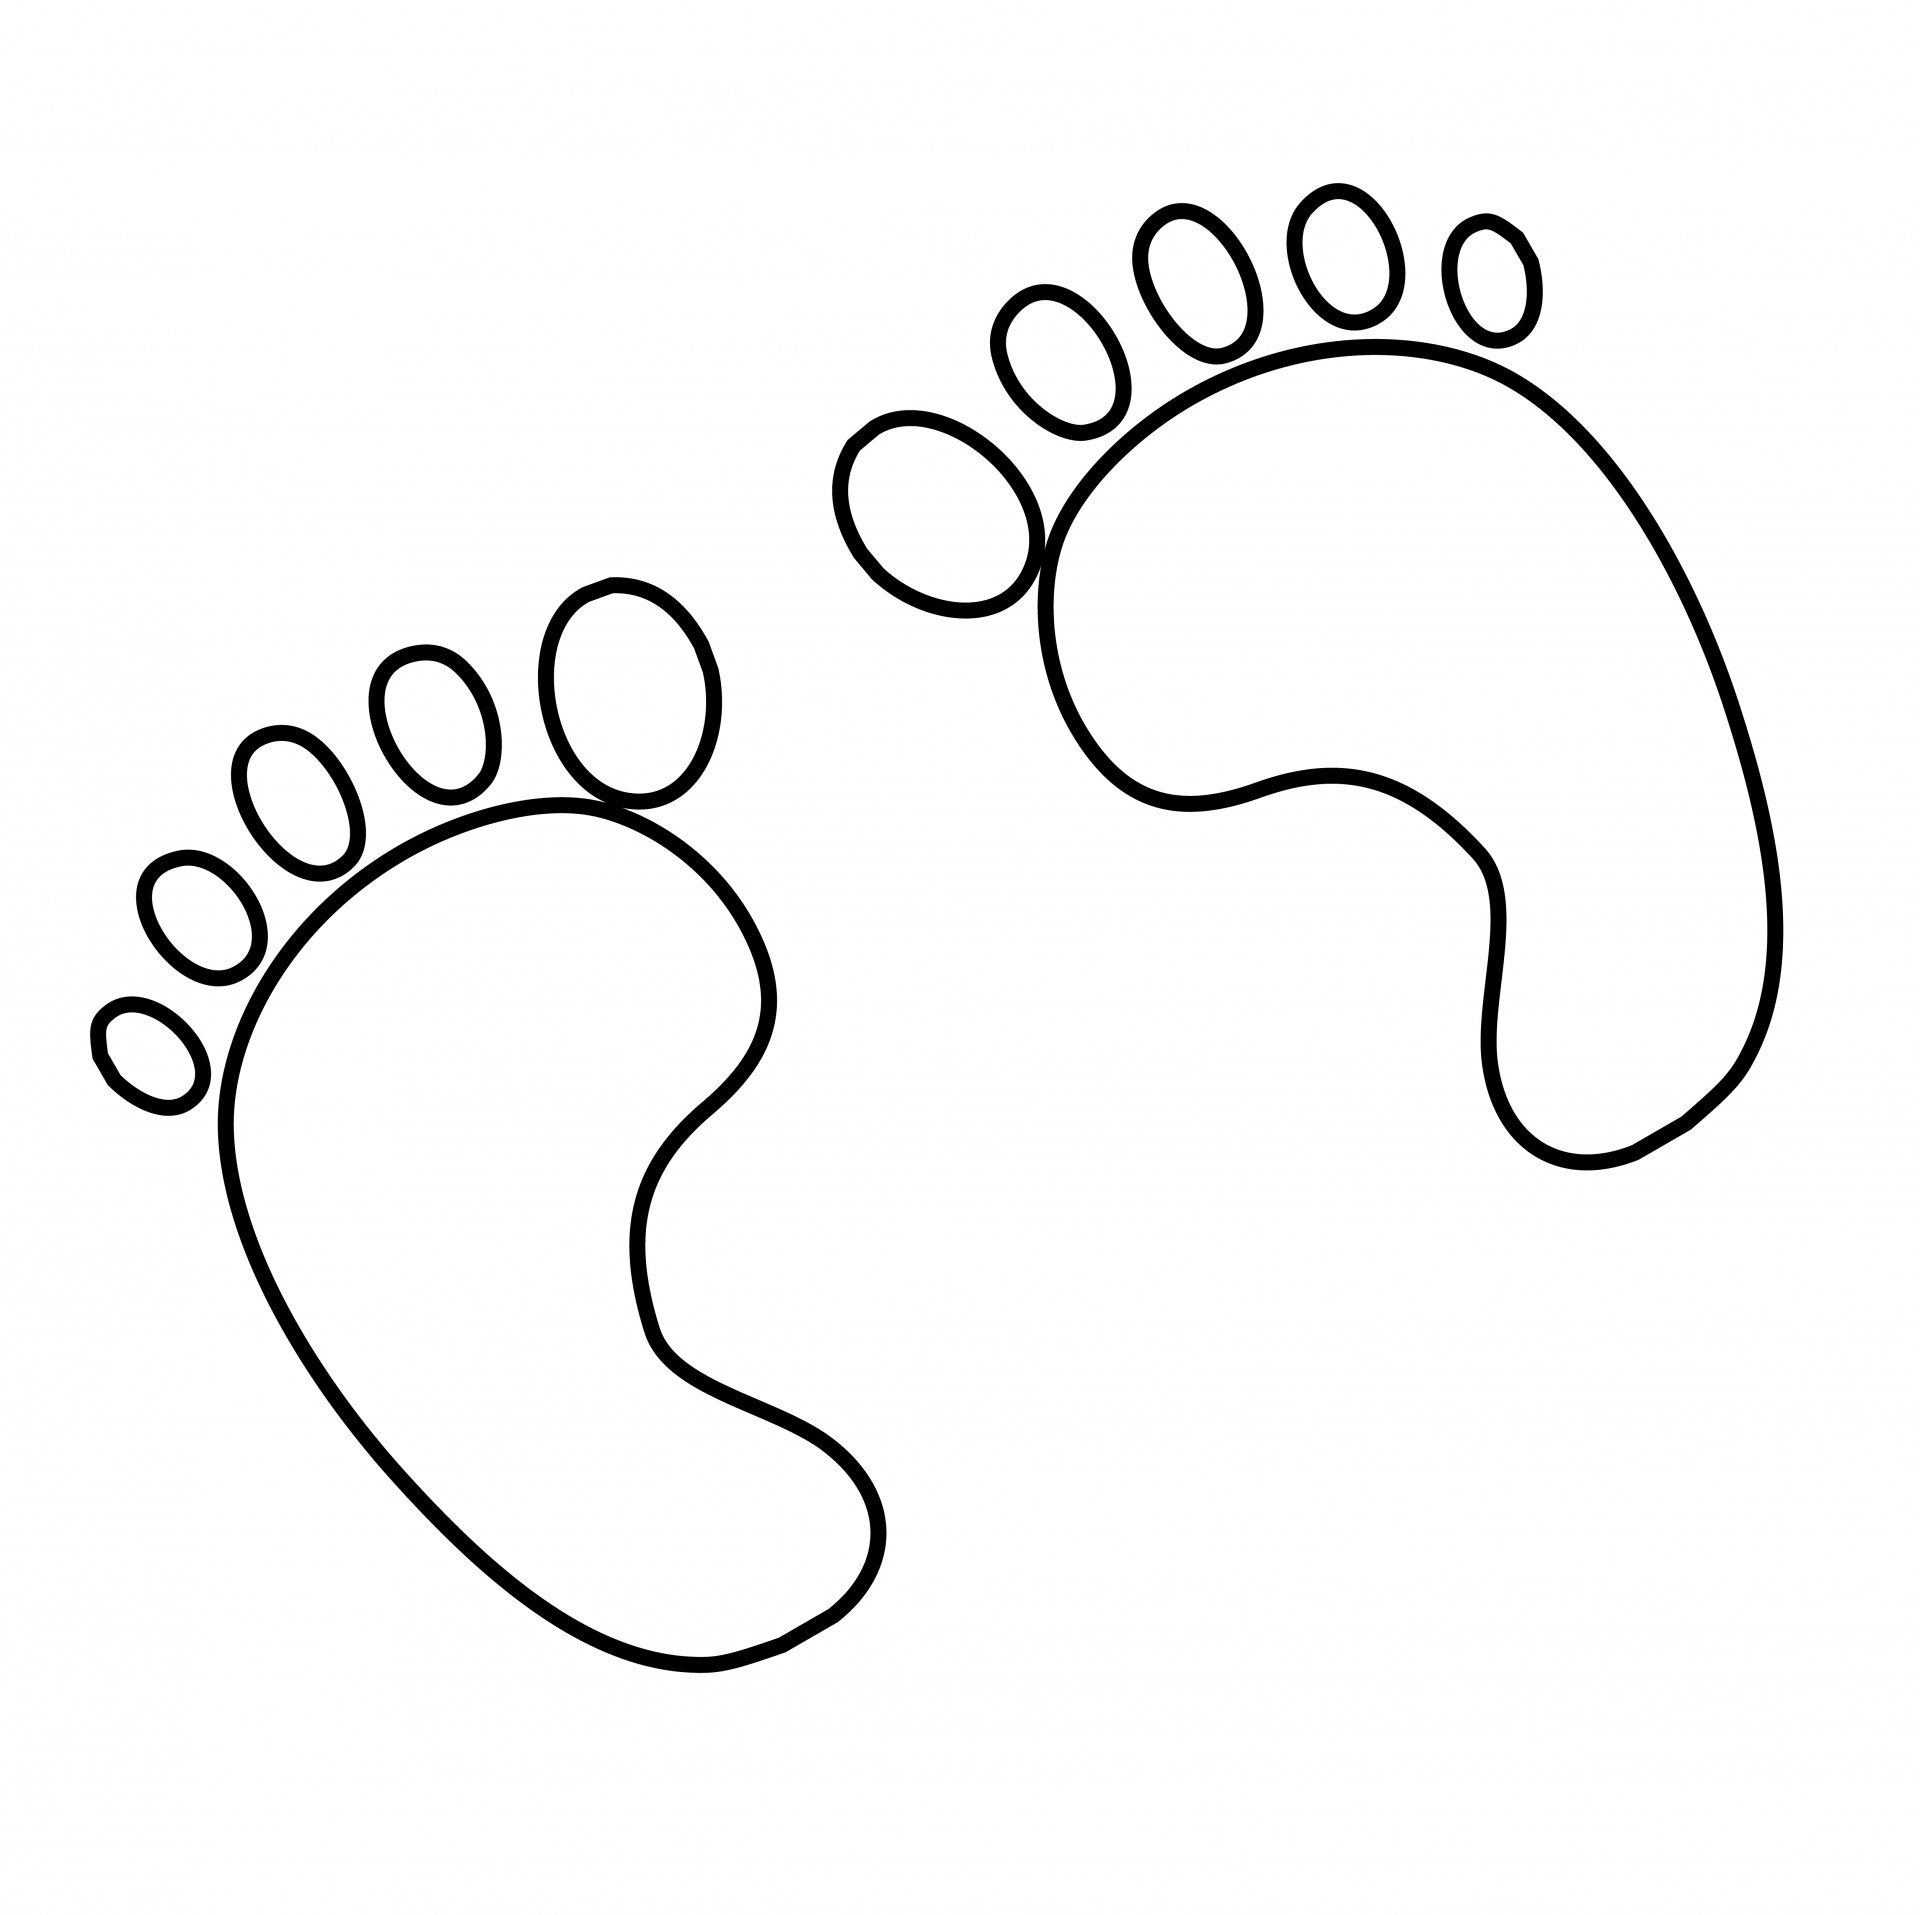 Collection of Footprint clipart